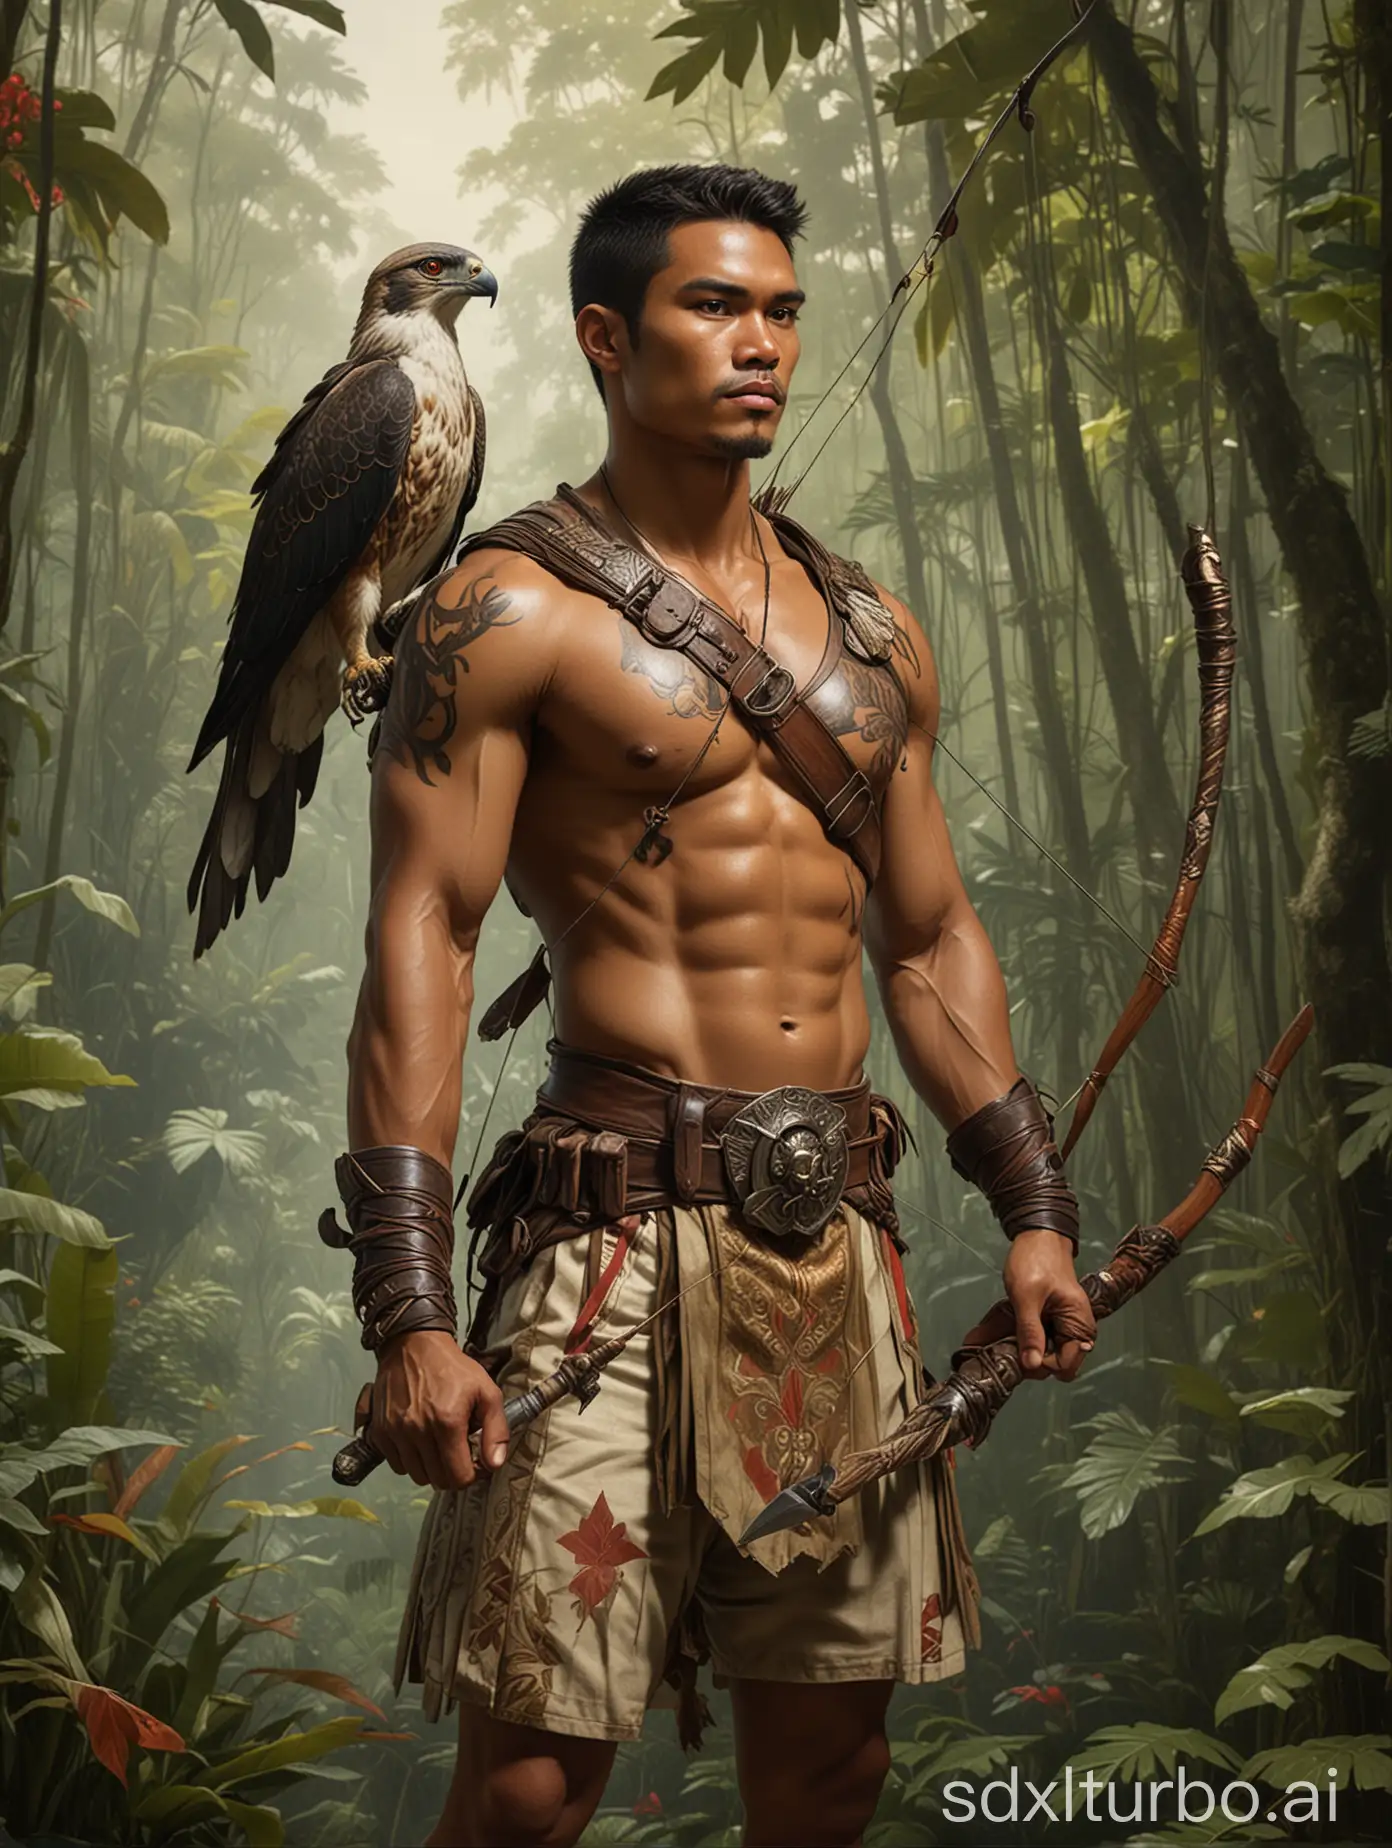 A full-body shot of a handsome, tall, and muscular Philipino-Java descent, with a rough-looking guy in a sensual traditional archer costume. With a falcon pet. With a background of an Indonesian rainforest in the style of painting by Leyendecker.